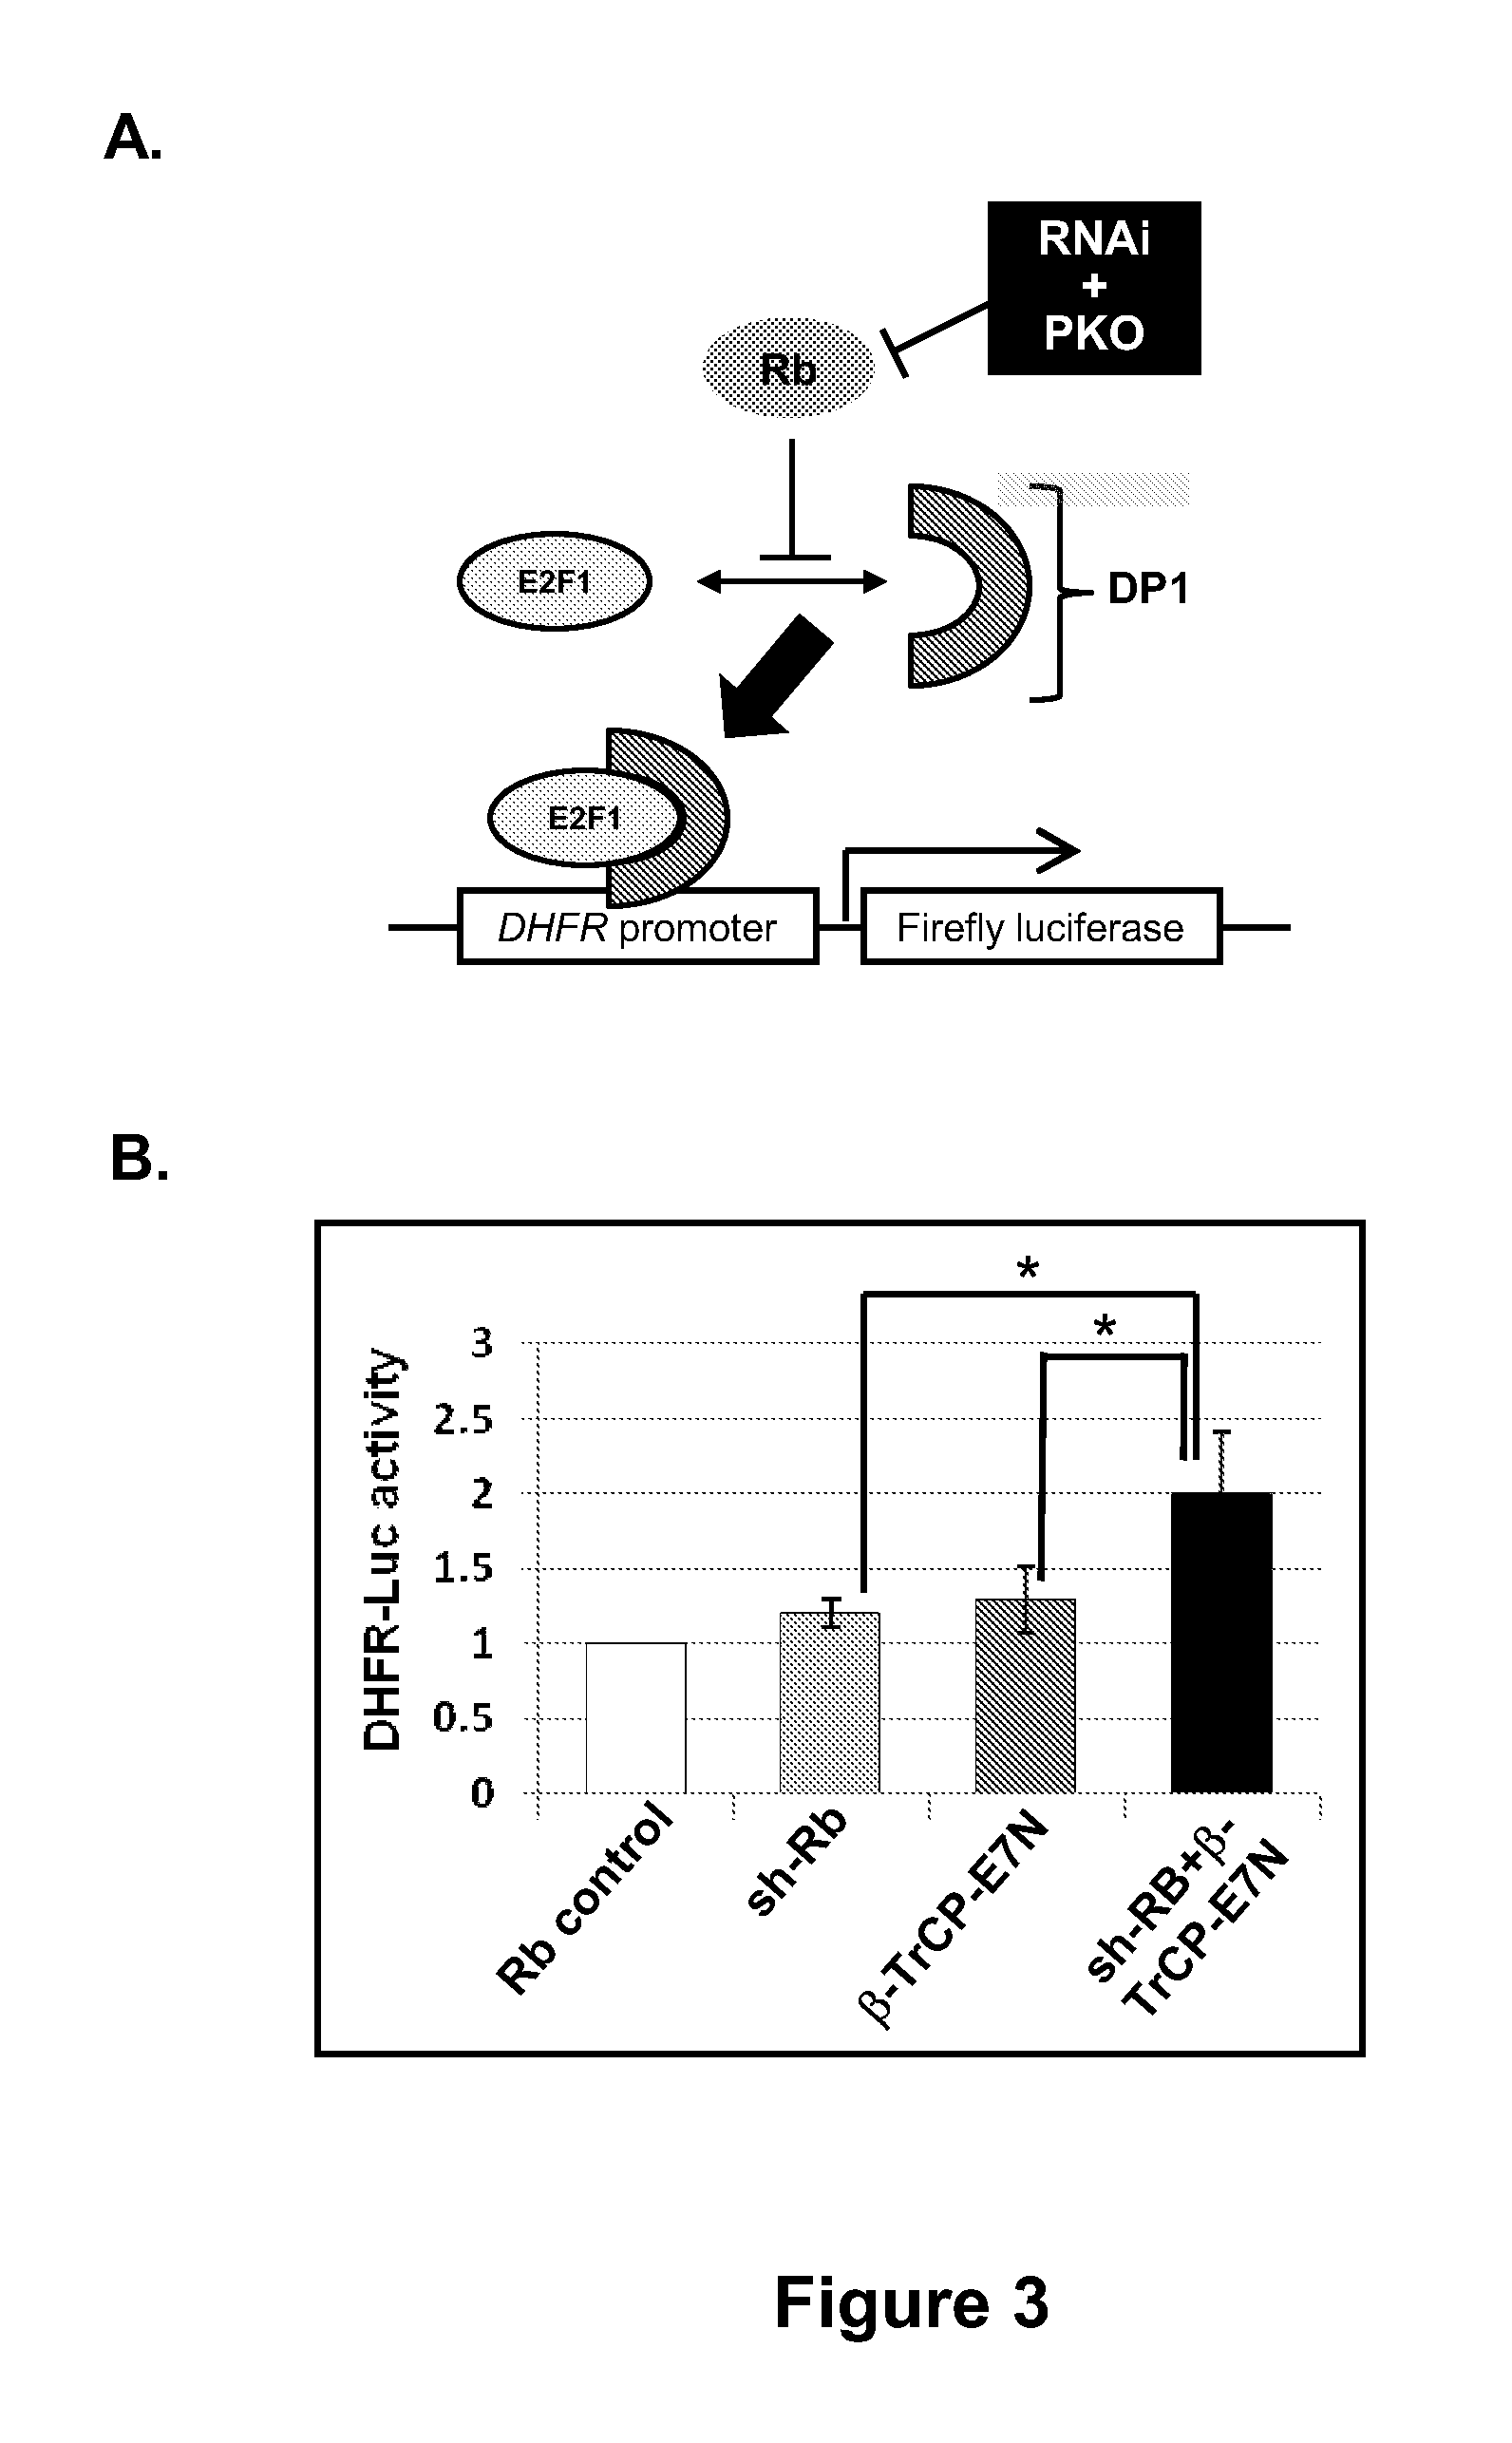 Methods for Reducing Protein Levels in a Cell